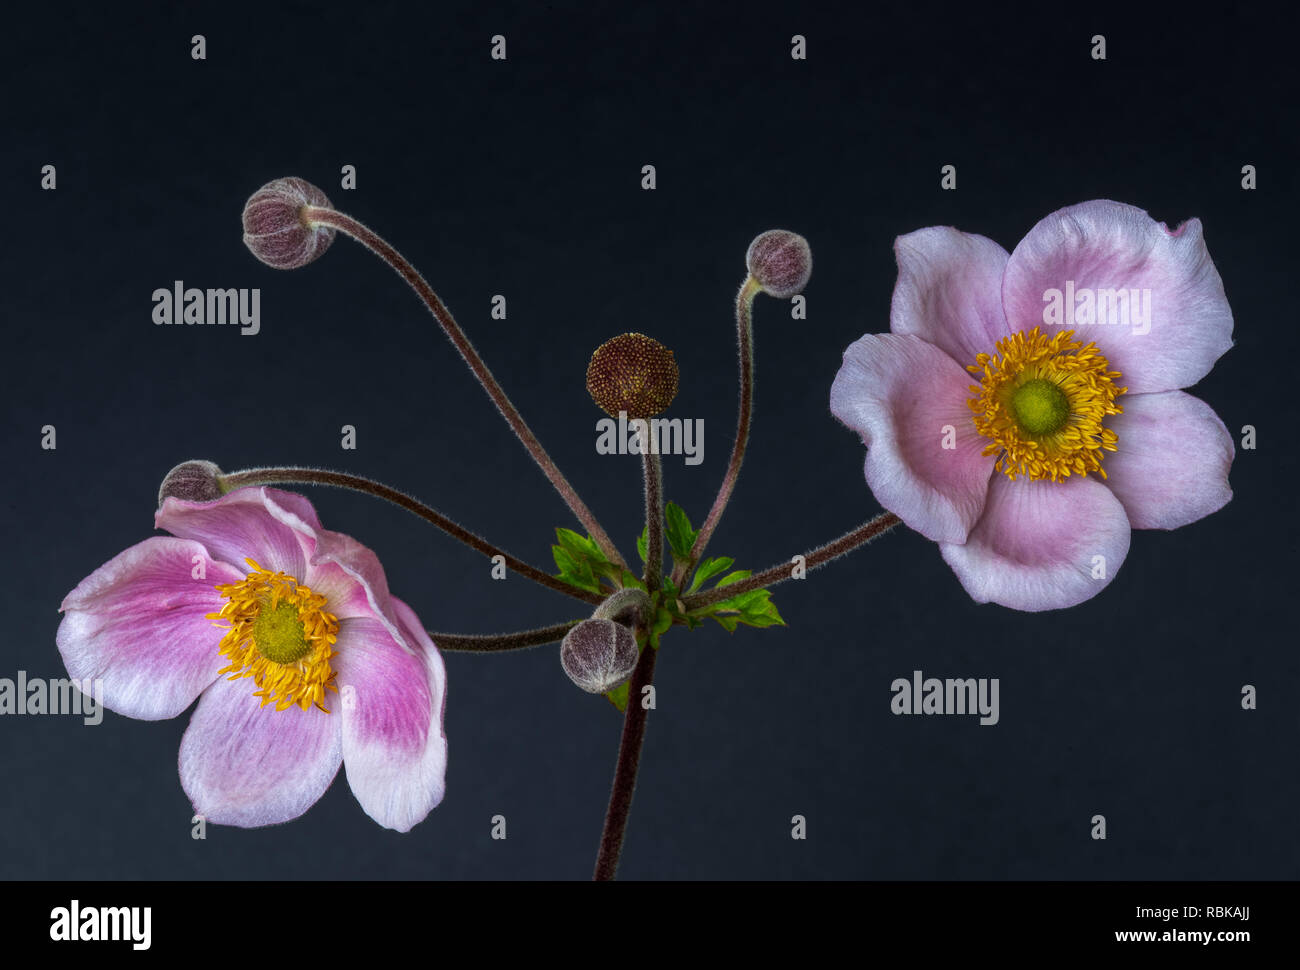 Color fine art still life floral macro flower image of a single isolated pink white autumn anemone with two blossoms,four buds blue paper background Stock Photo